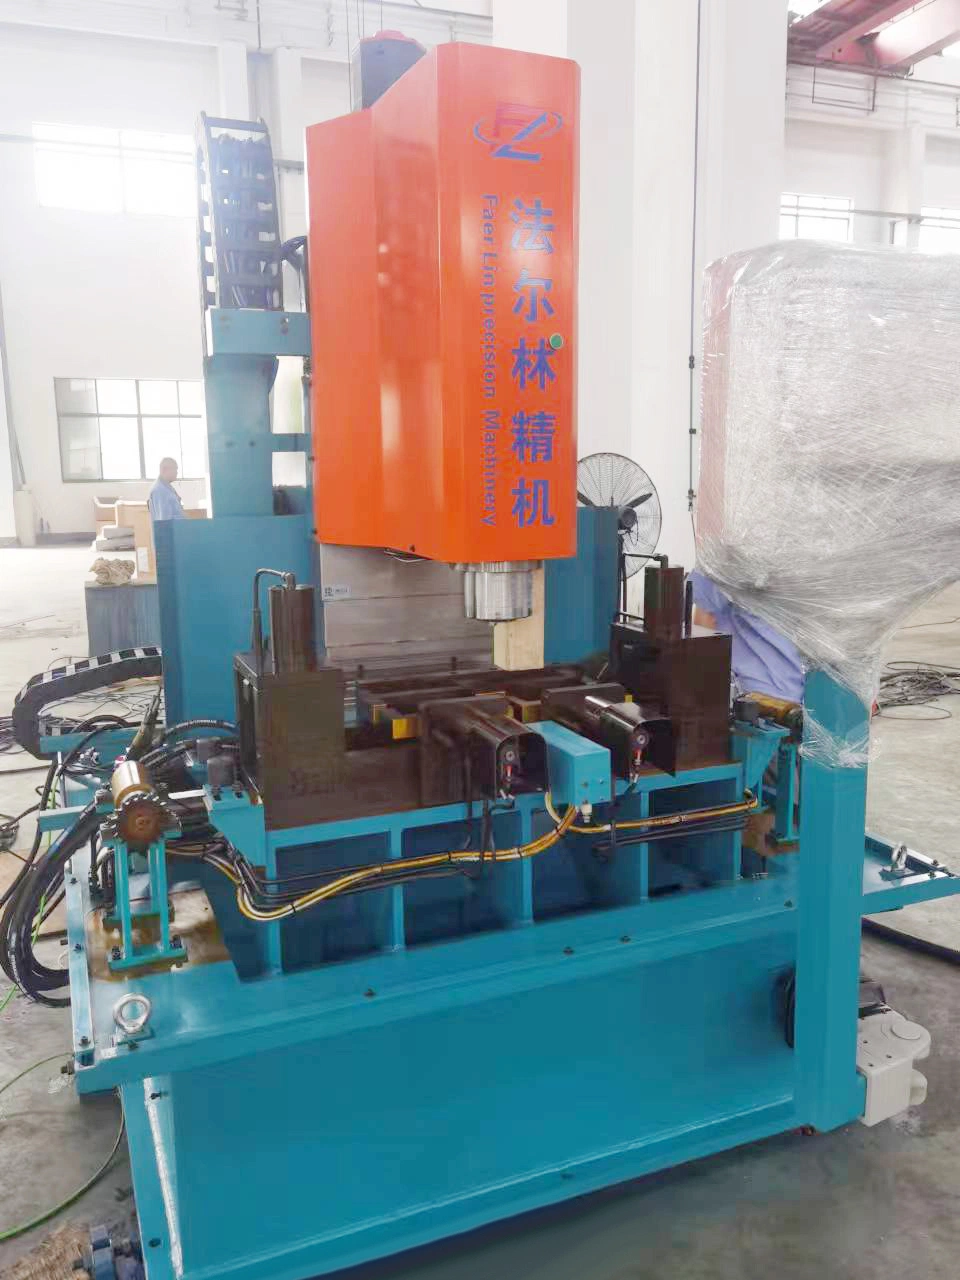 Zk52 Vertical Moving Column CNC Drilling Machine for T75 Specification Elevator Guide Rail Bolt Mounting Hole OEM/ODM